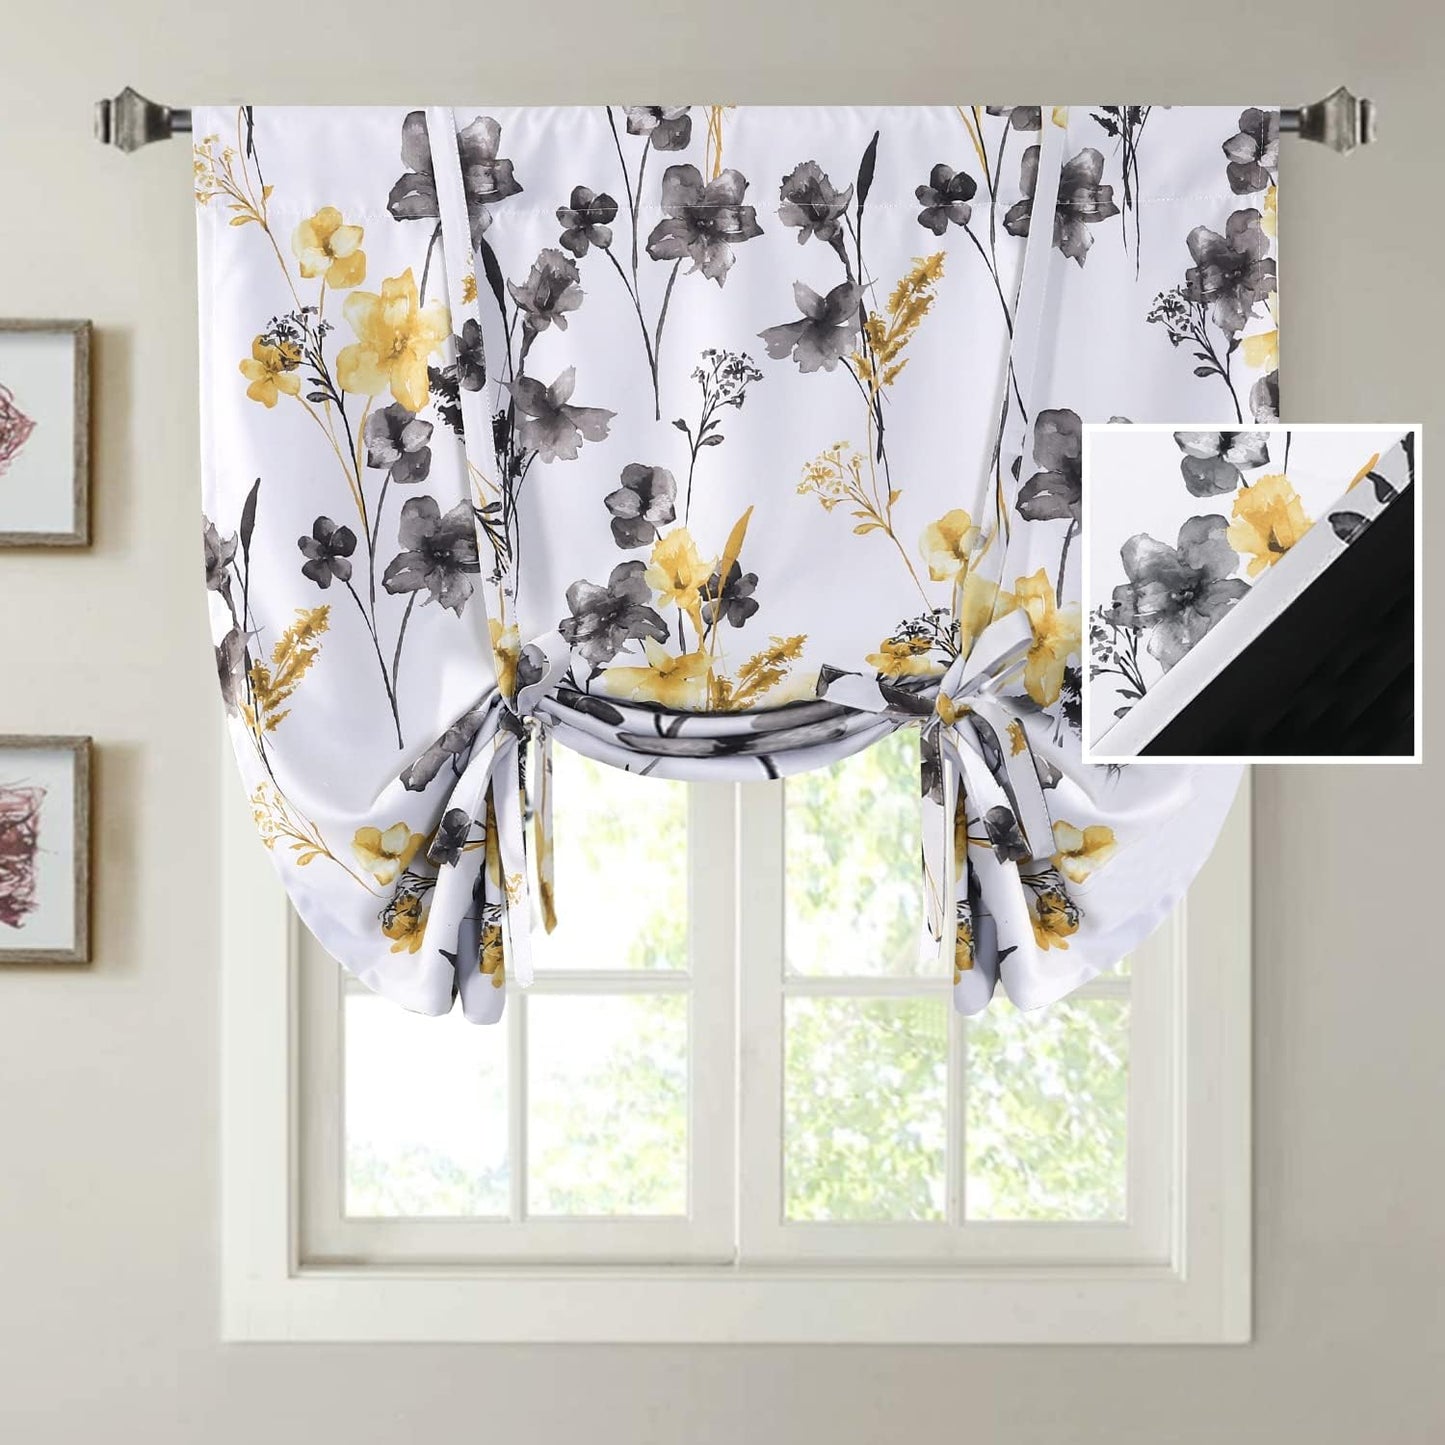 H.VERSAILTEX 100% Blackout Tie up Curtains for Bedroom Thermal Insulated Kitchen Curtains 45 Inches Long Rod Pocket Blackout Curtains for Small Window / Bathroom with Black Liner, White 42"W X 45"L  H.VERSAILTEX Cattleya In Grey/Yellow 42"W X 45"L 